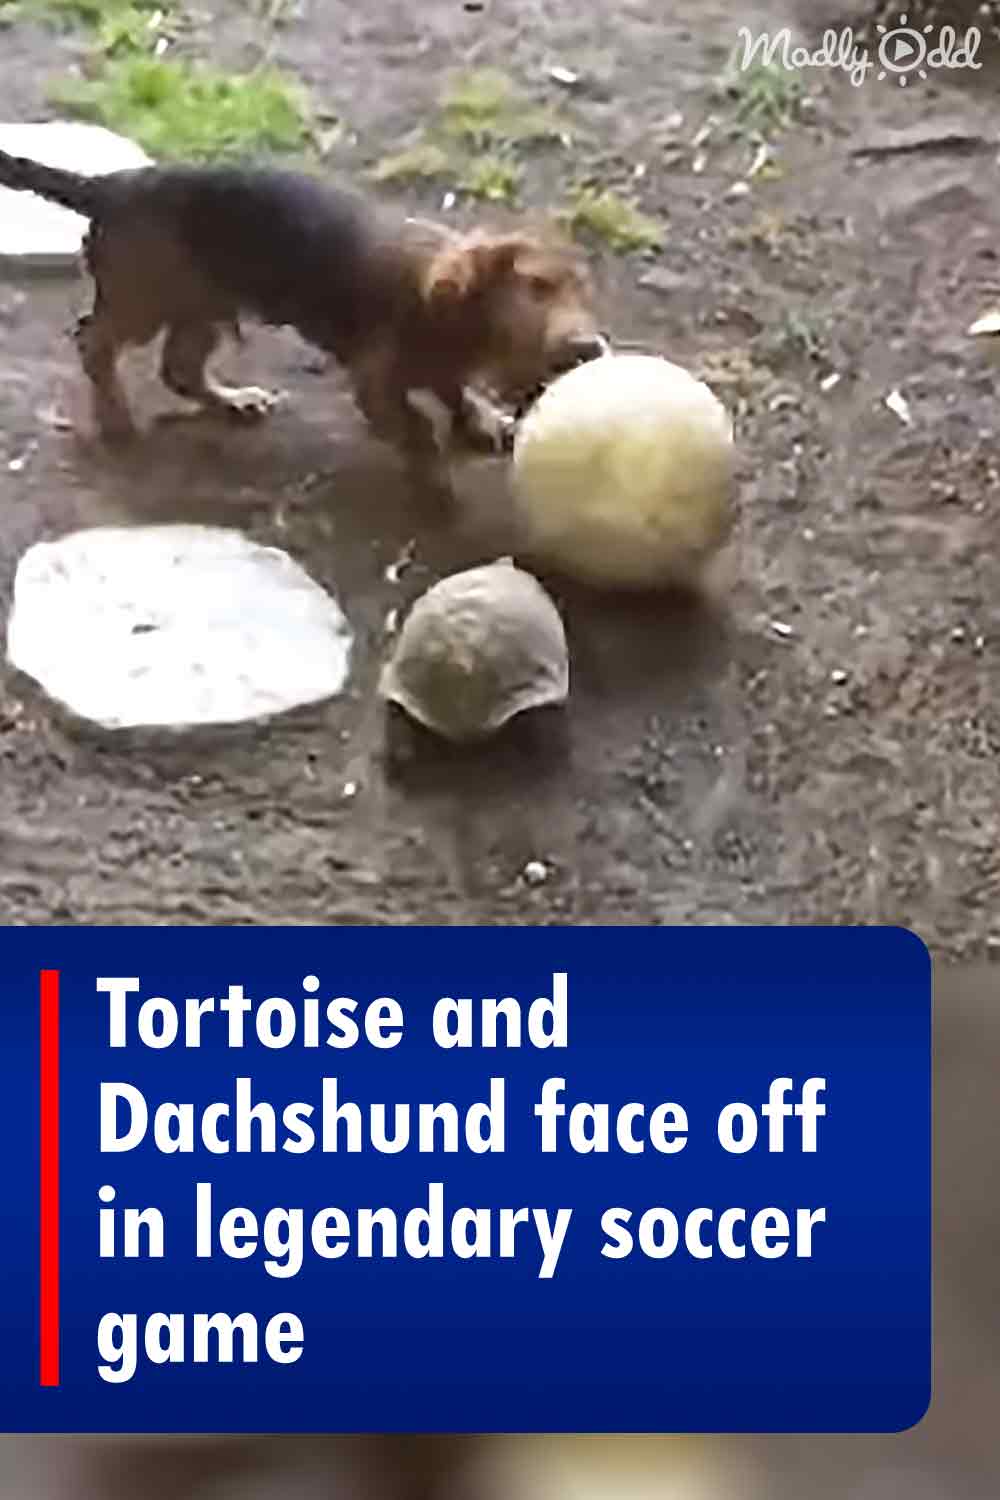 Tortoise and Dachshund face off in legendary soccer game